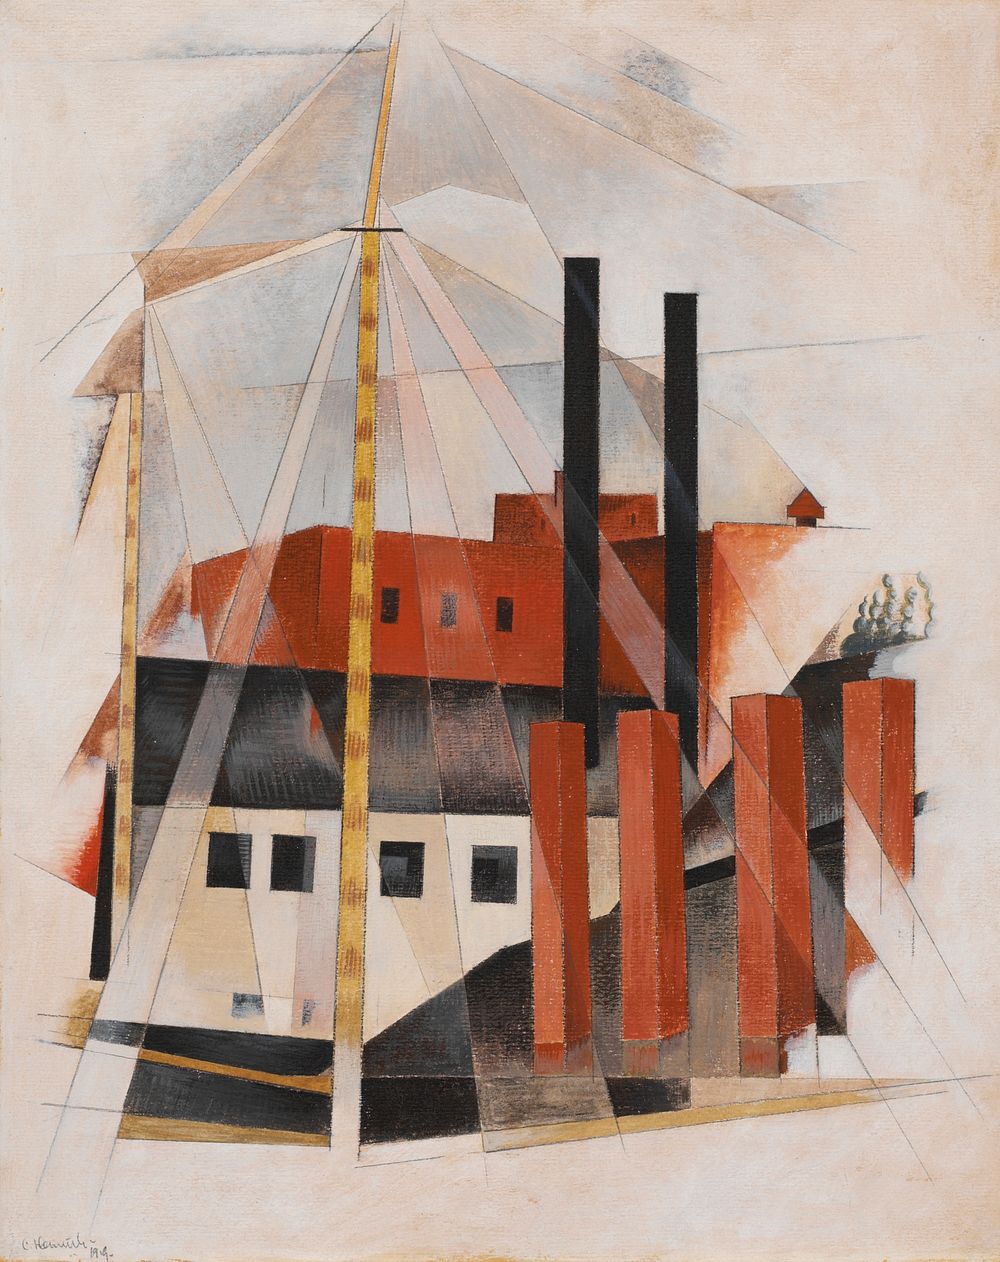 Piano Mover's Holiday by Charles Demuth